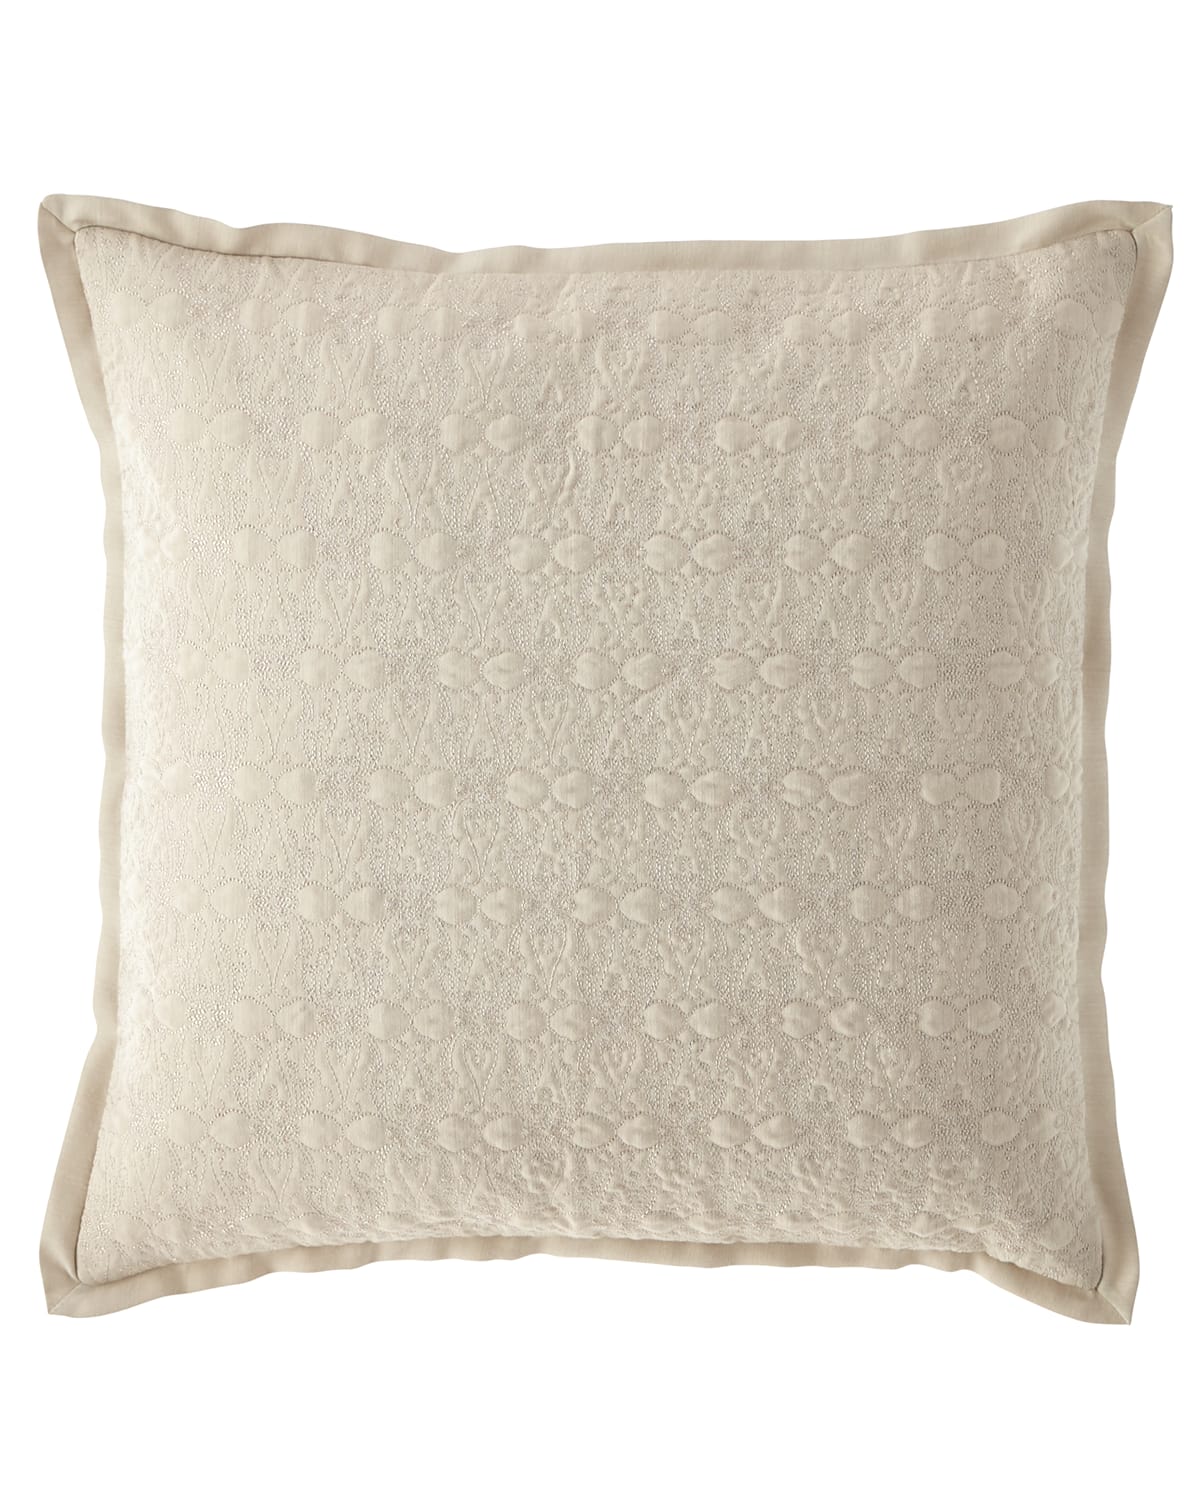 Image Waterford Victoria Orchid Decorative Pillow, 18"Sq.